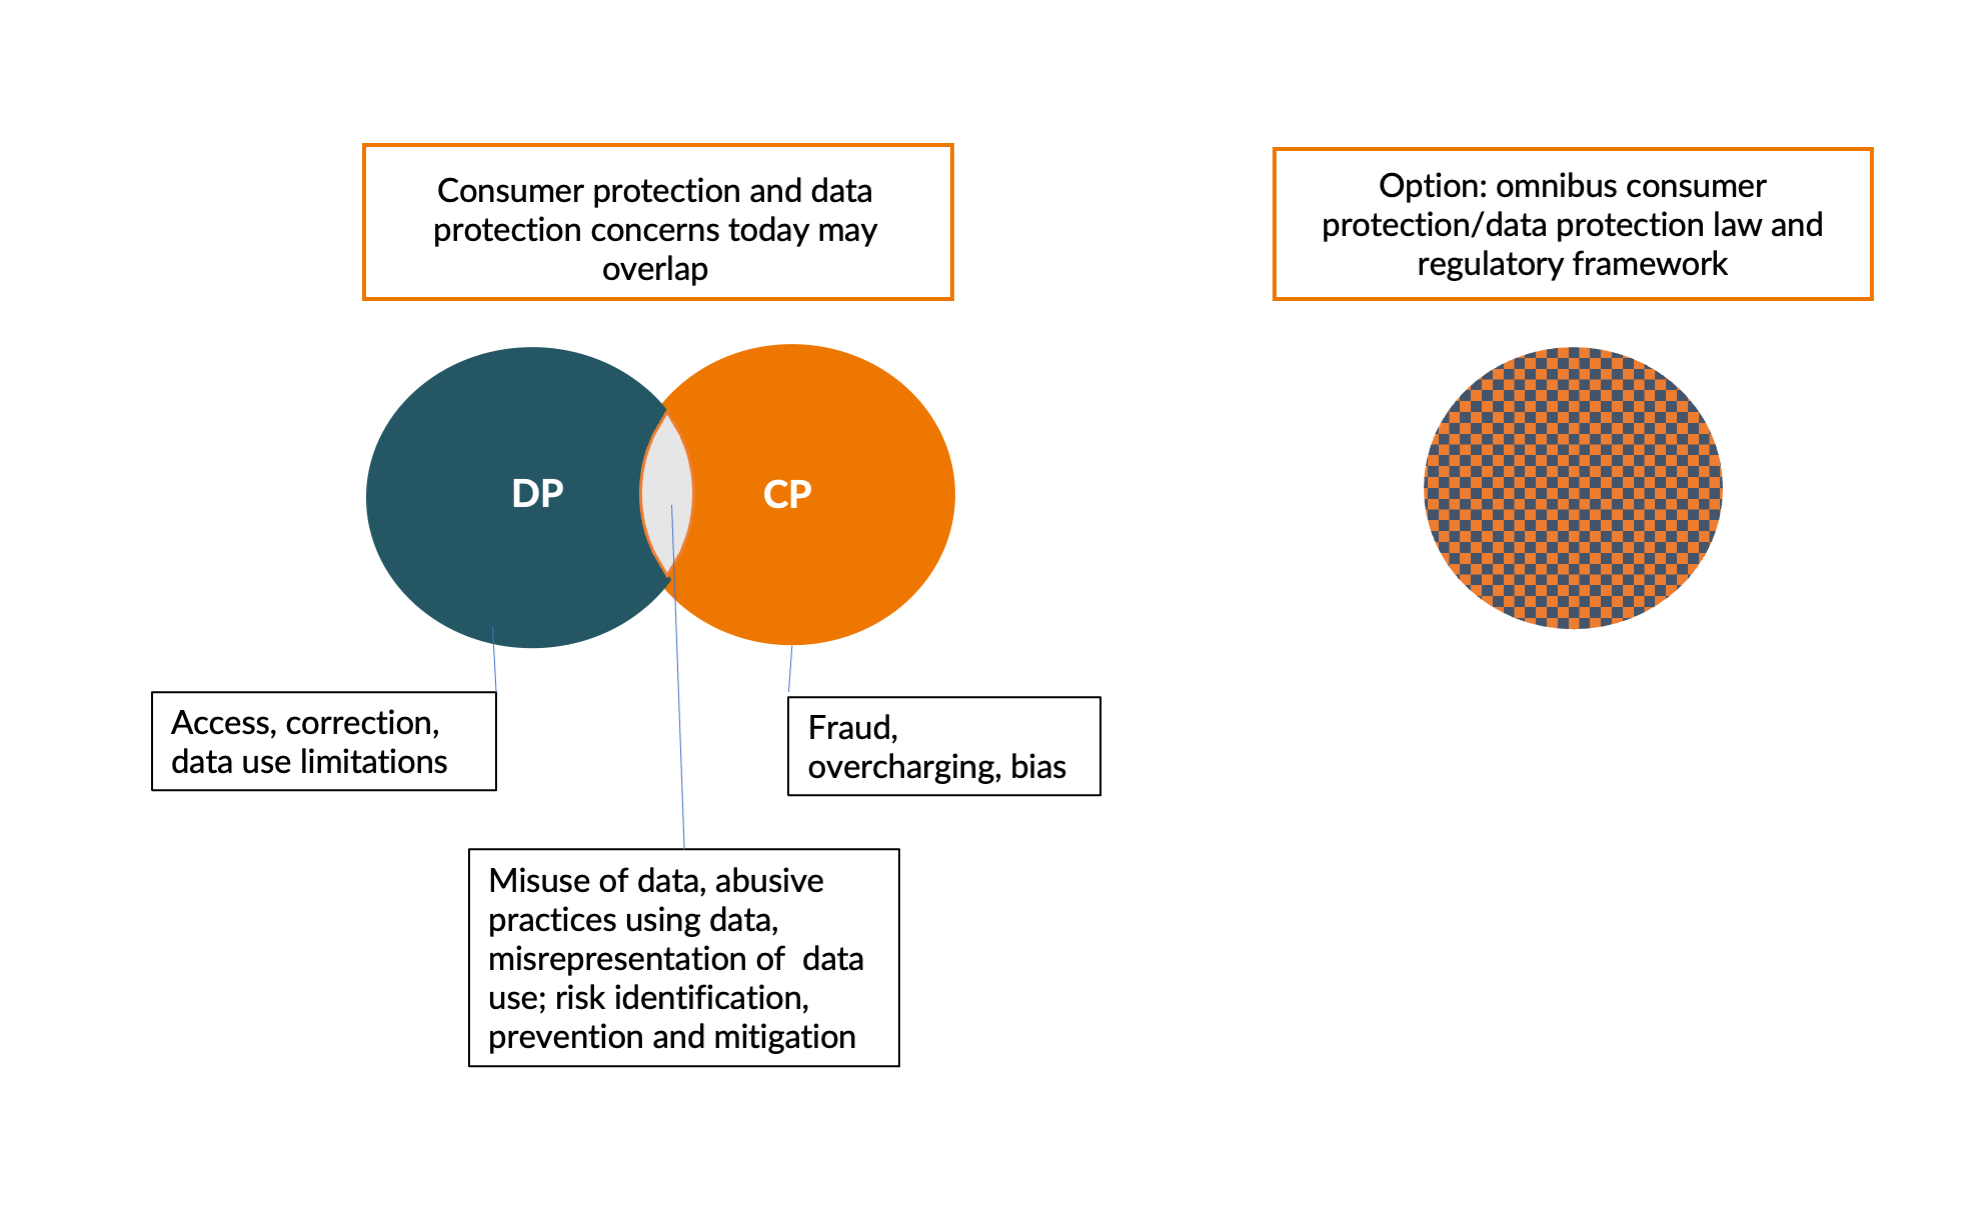 The overlap of consumer and data protection